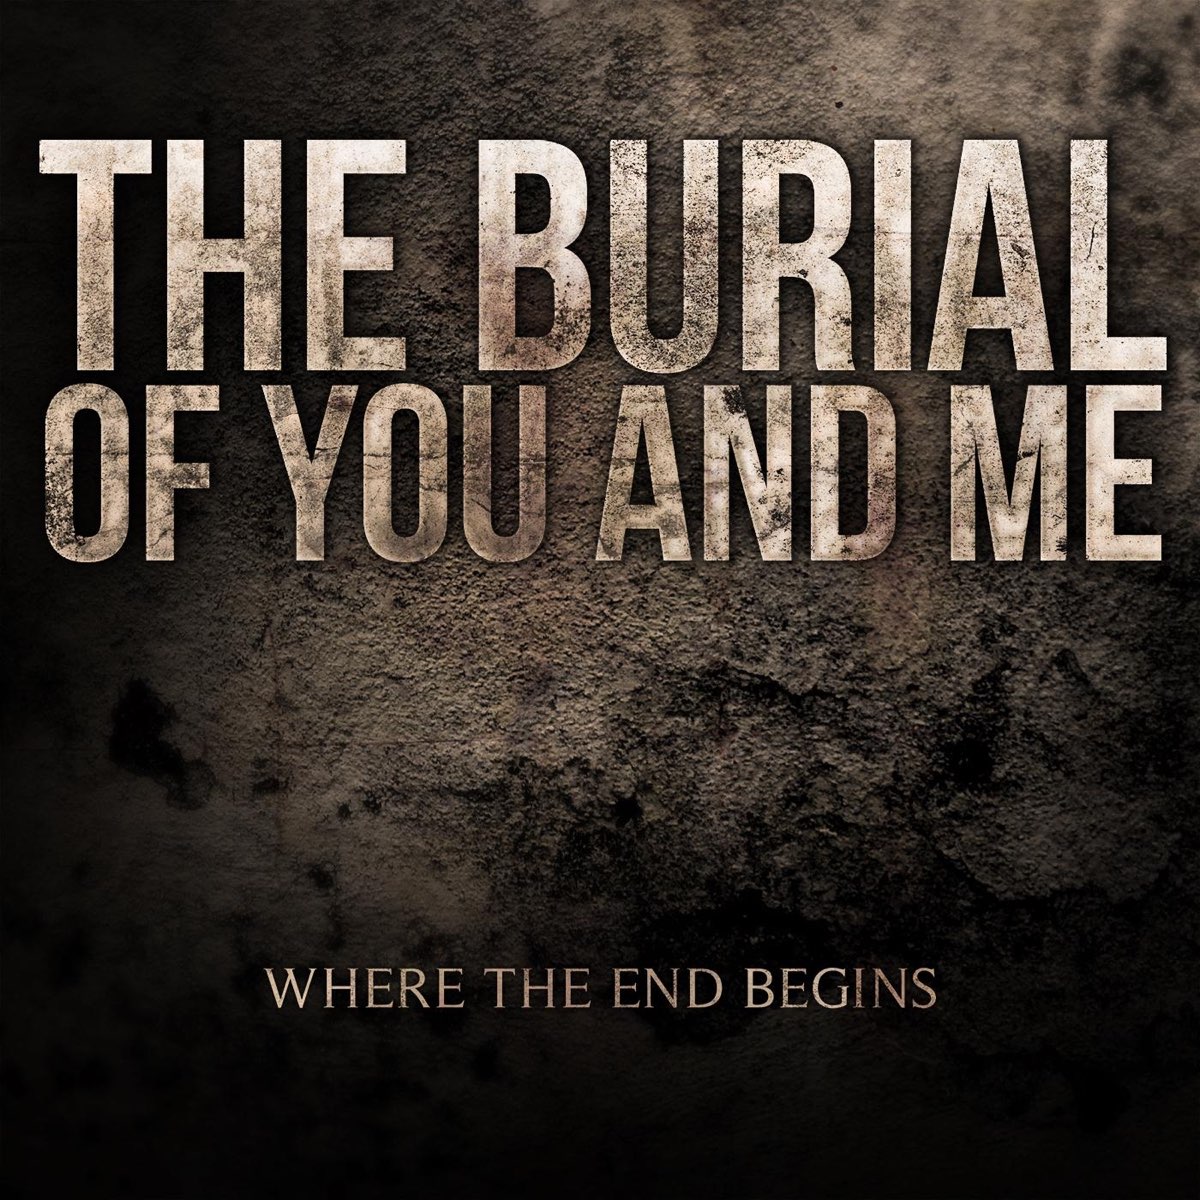 Burial. The Burial of you and me. Begin end. End of beginning текст. End of begging djo